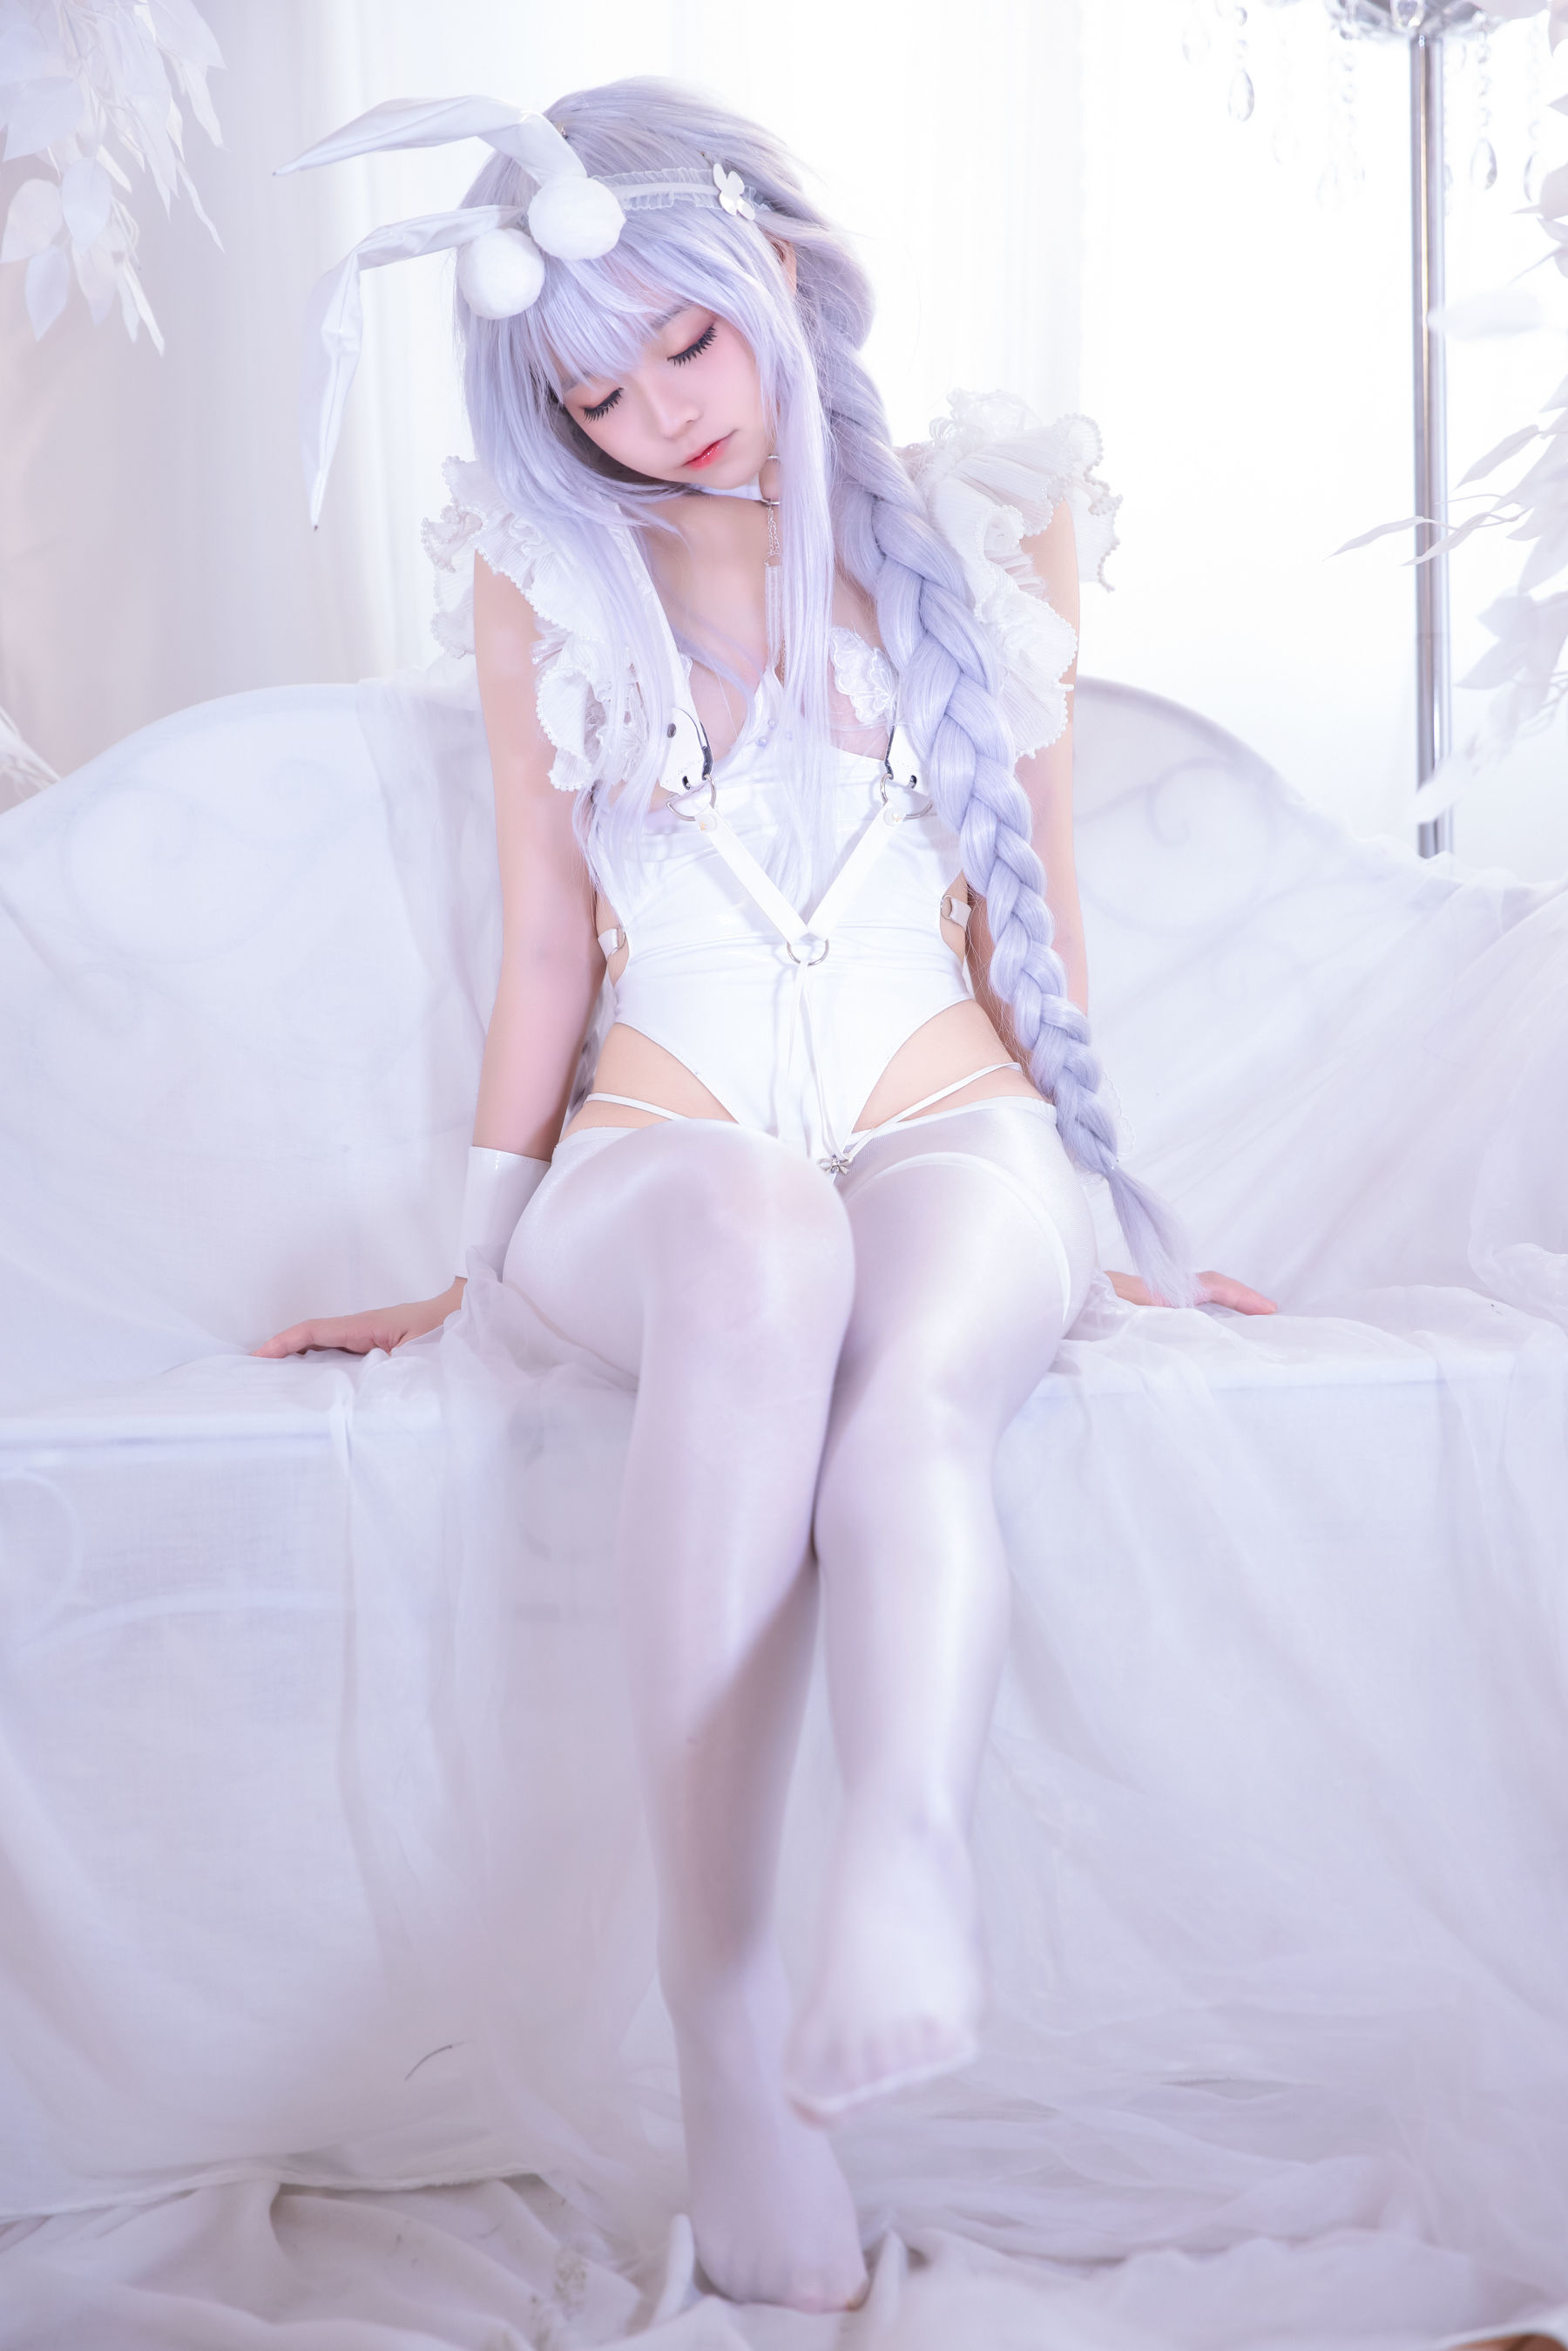 [Net red COSER] Anime blogger G44 will not be injured – vicious